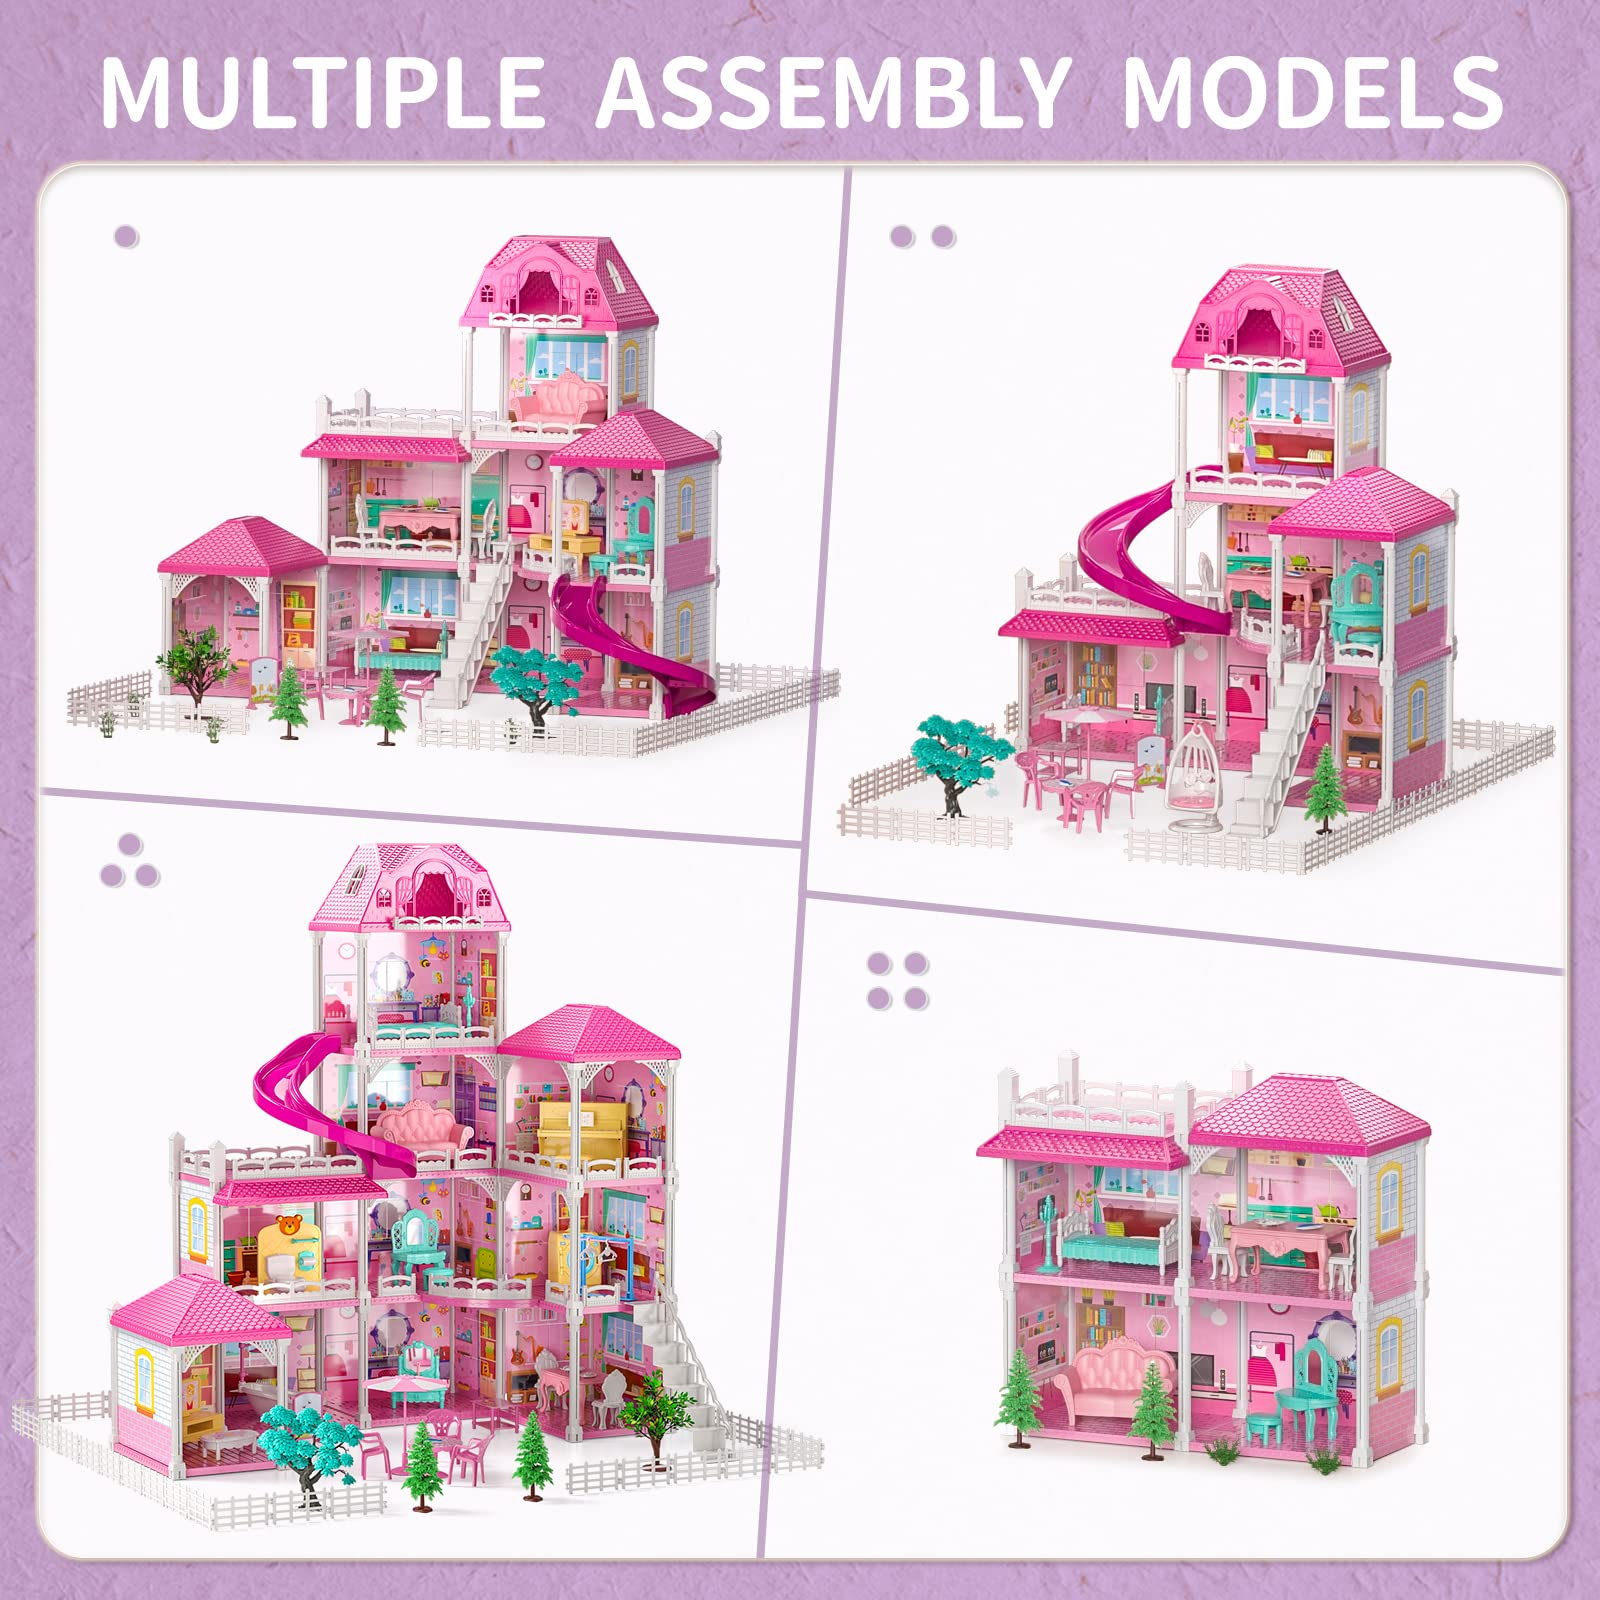  Dream Doll House Girls Toys- 4-Story 12 Rooms Playhouse 4-5  Year Old w/ 2 Dolls, Dollhouse Furniture Accessories, Pretend Cottage Toy  House, Toddler for Kids Ages 3 4 5 6 7 : Everything Else